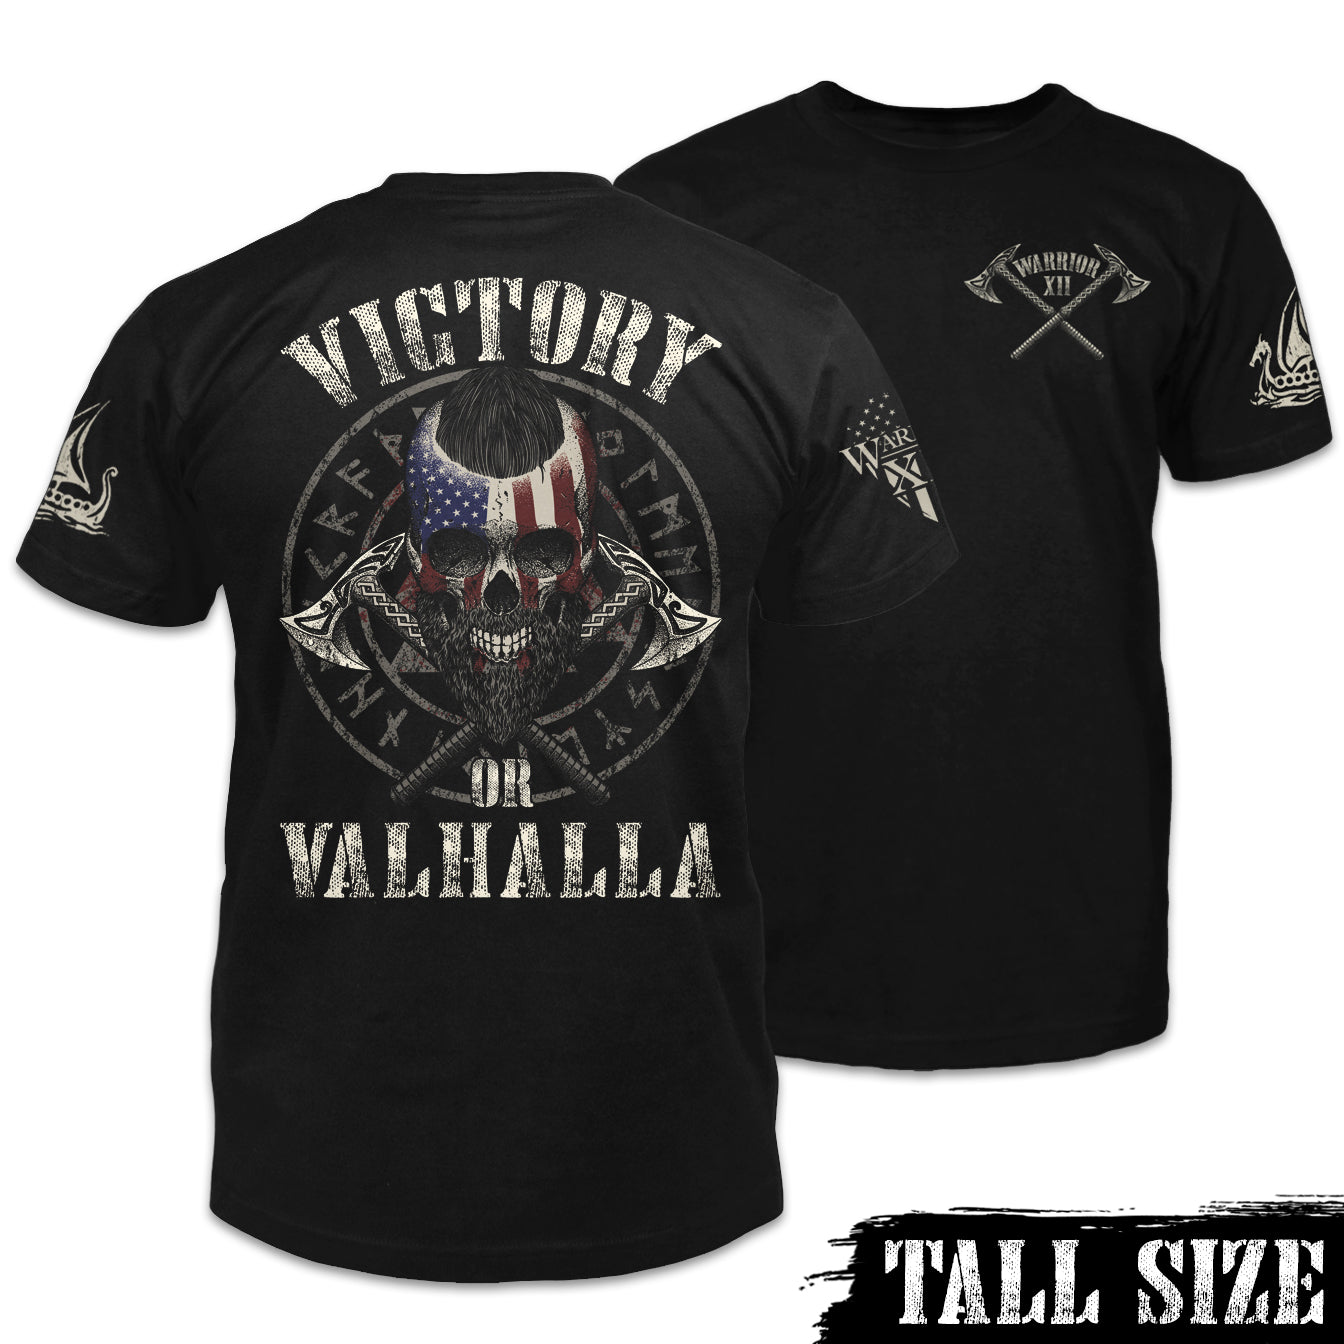 Front & back black tall sized shirt with the words "Victory Or Valhalla" printed on the shirt.